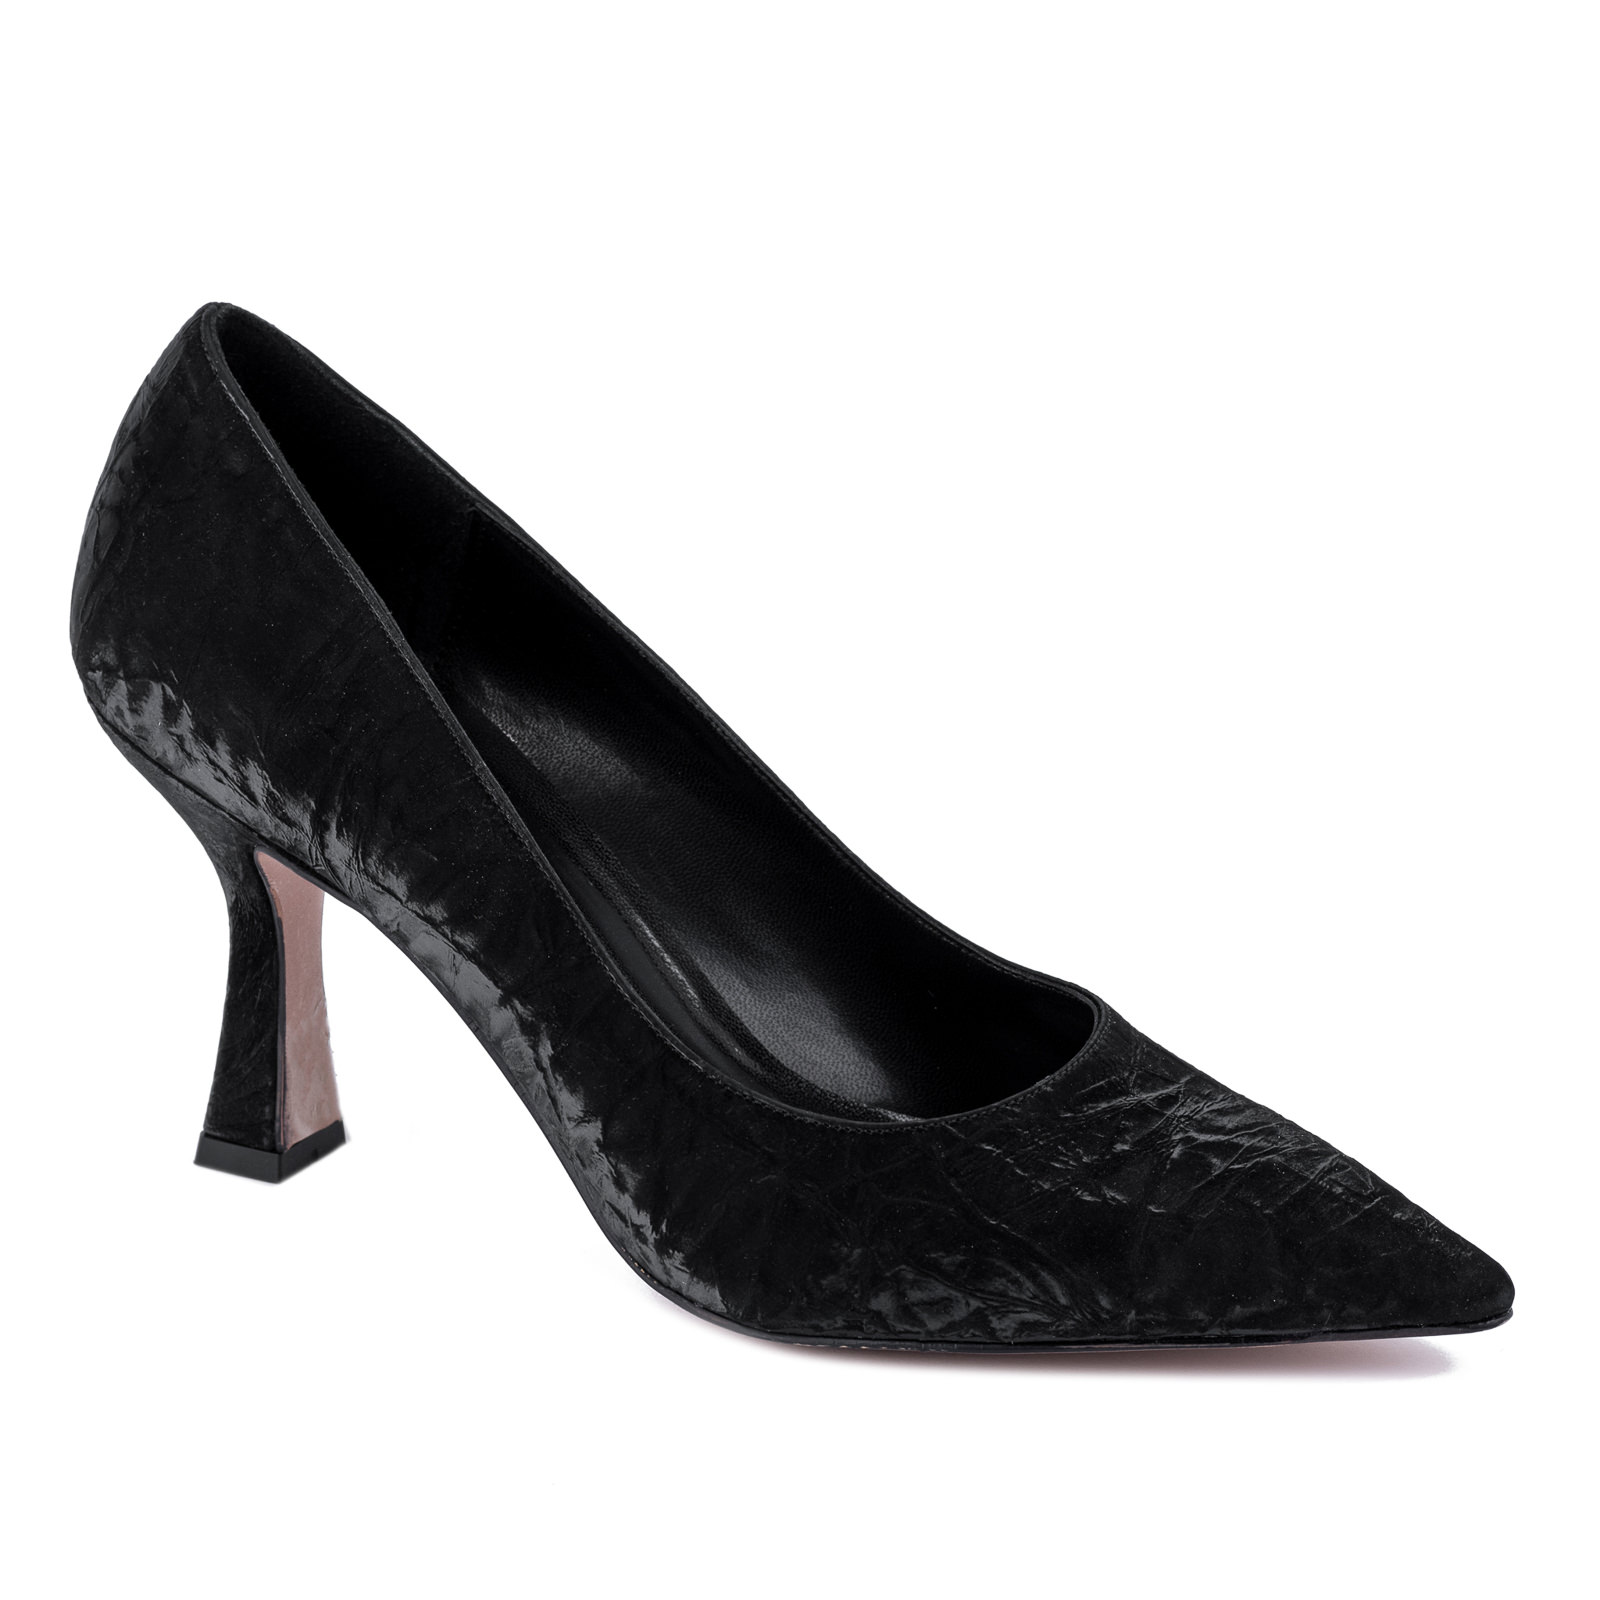 PATENT STILLETO SHOES WITH THIN HEEL - BLACK